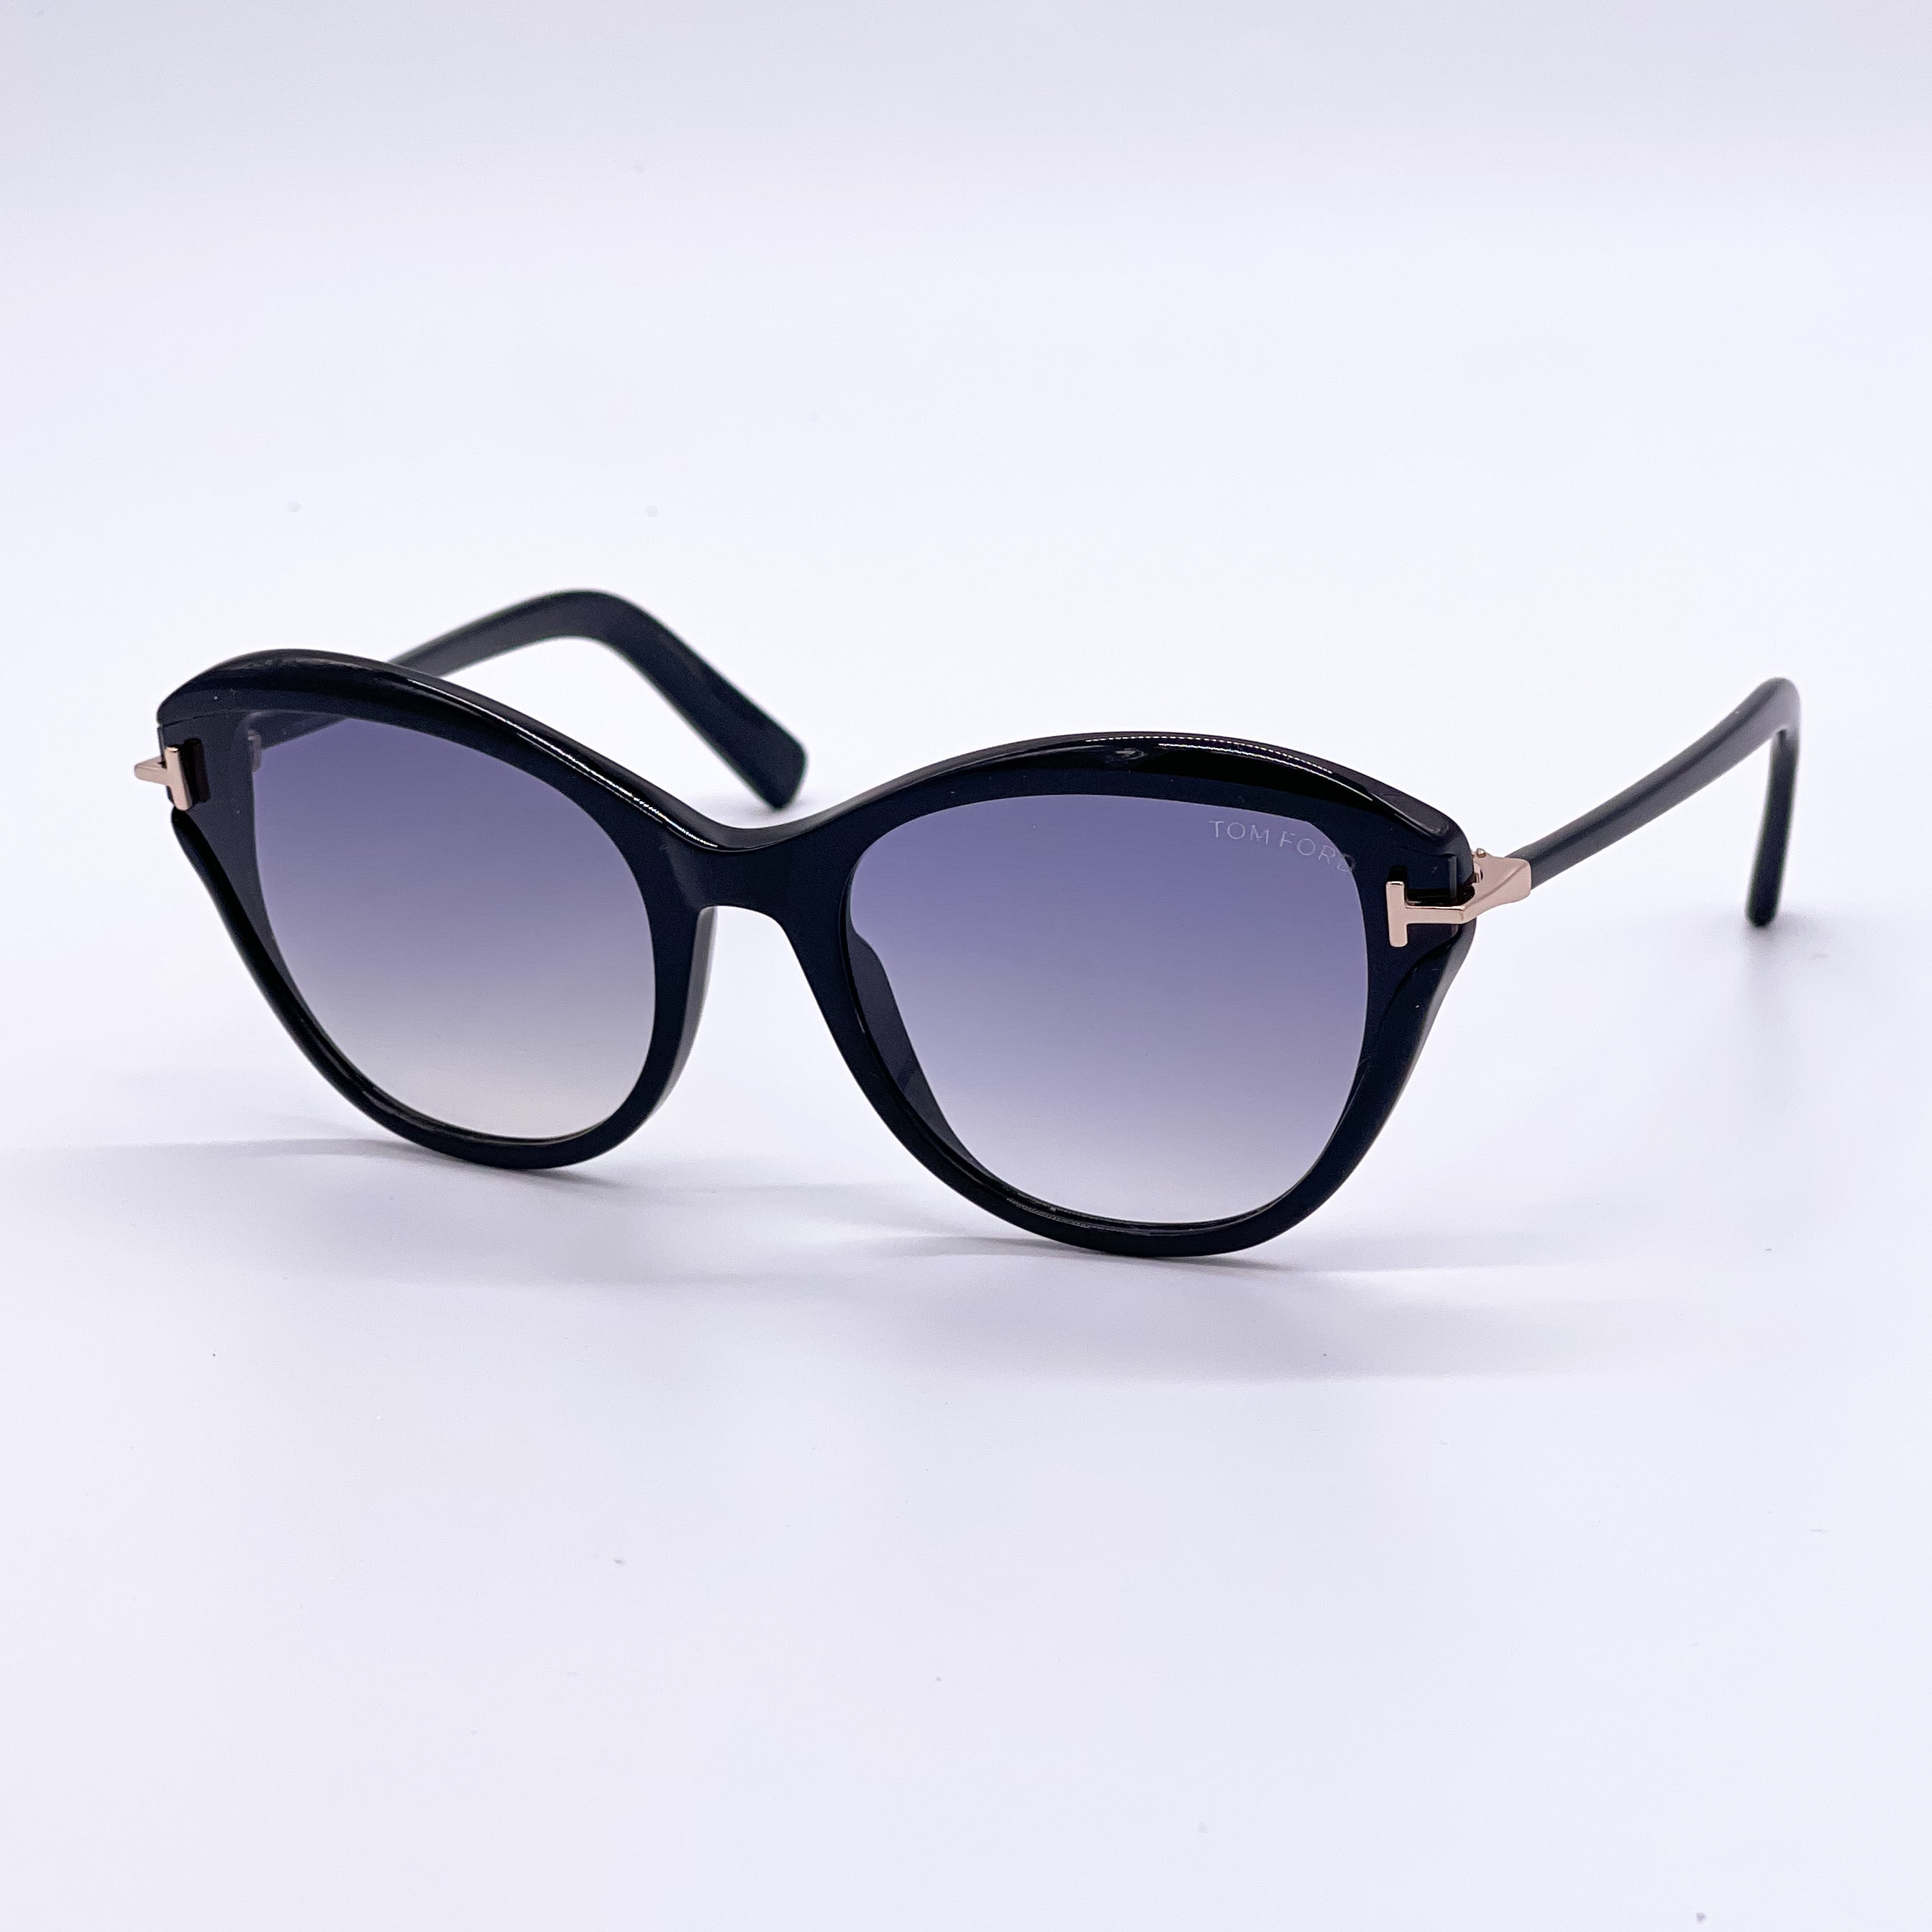 TOM FORD LEIGH TF850 01B SUNGLASSES FT0850/S